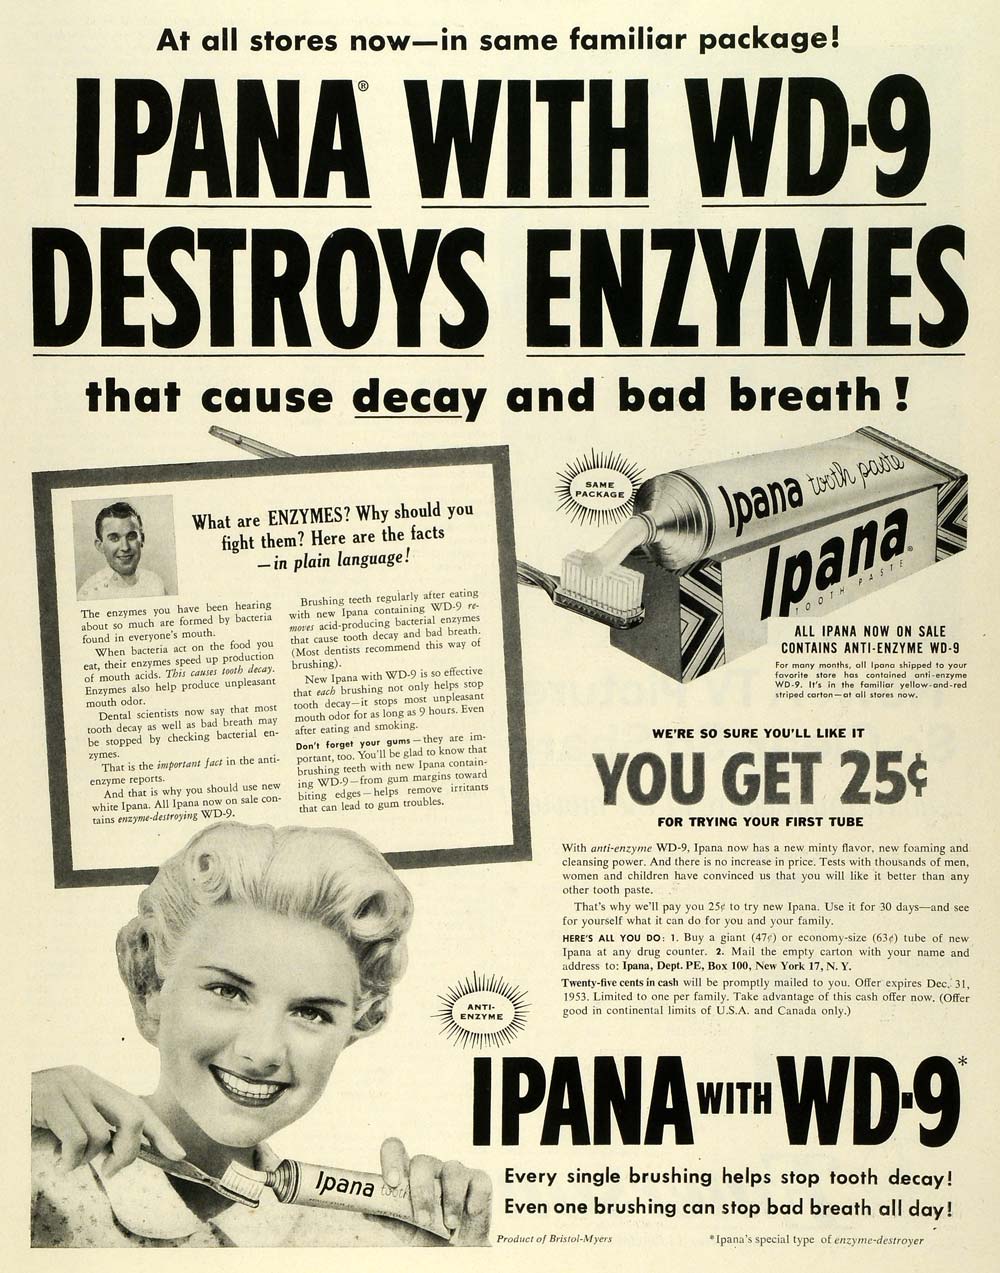 1953 Ad Brystol-Myers Co Ipana WD9 Toothpaste Dental Cream Health Products SEP6